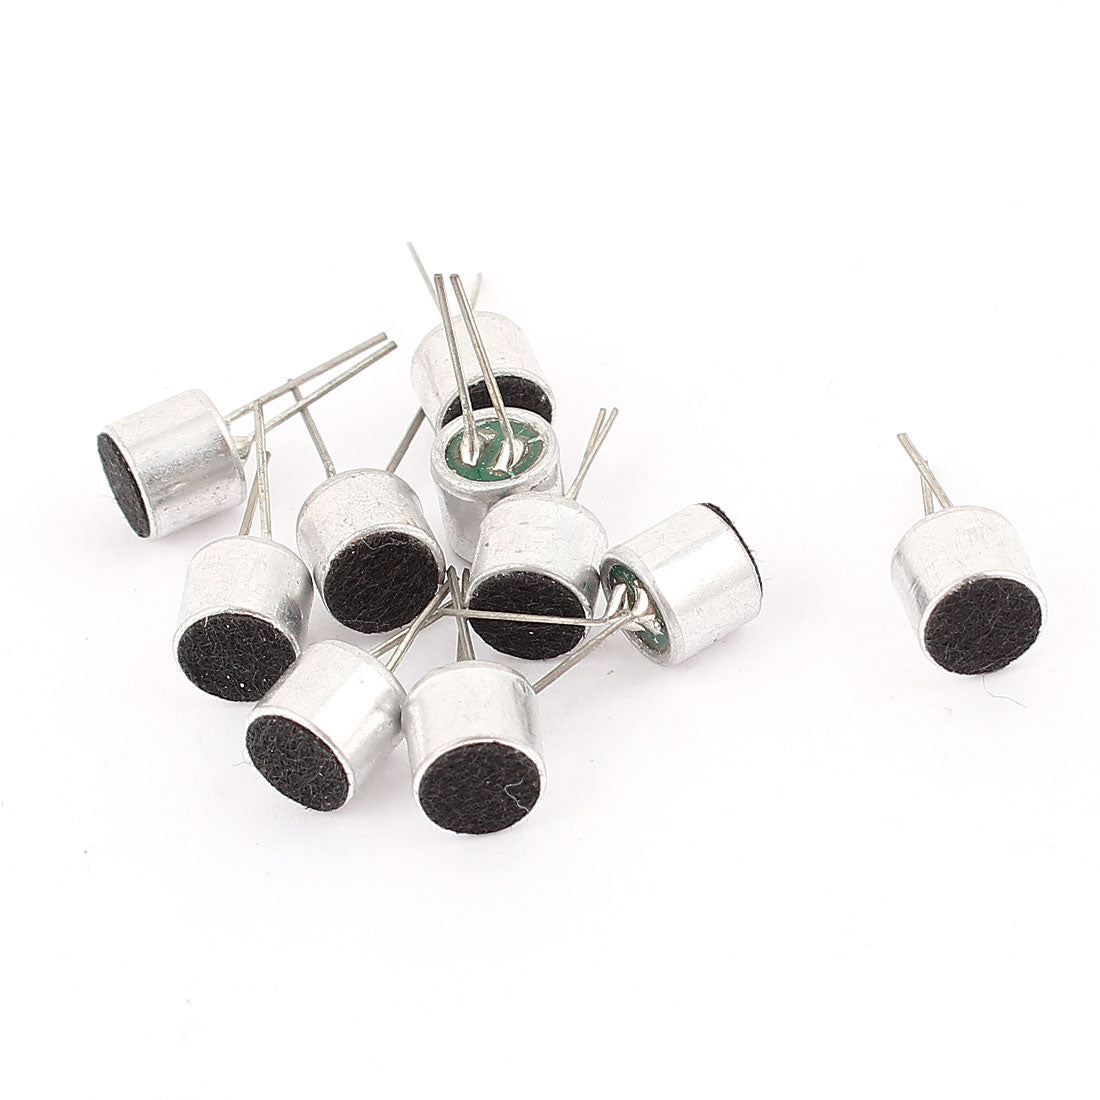 uxcell Uxcell 10 Pcs 6mm x 5mm Through Hole Mini Electret Microphone Condenser Pickup